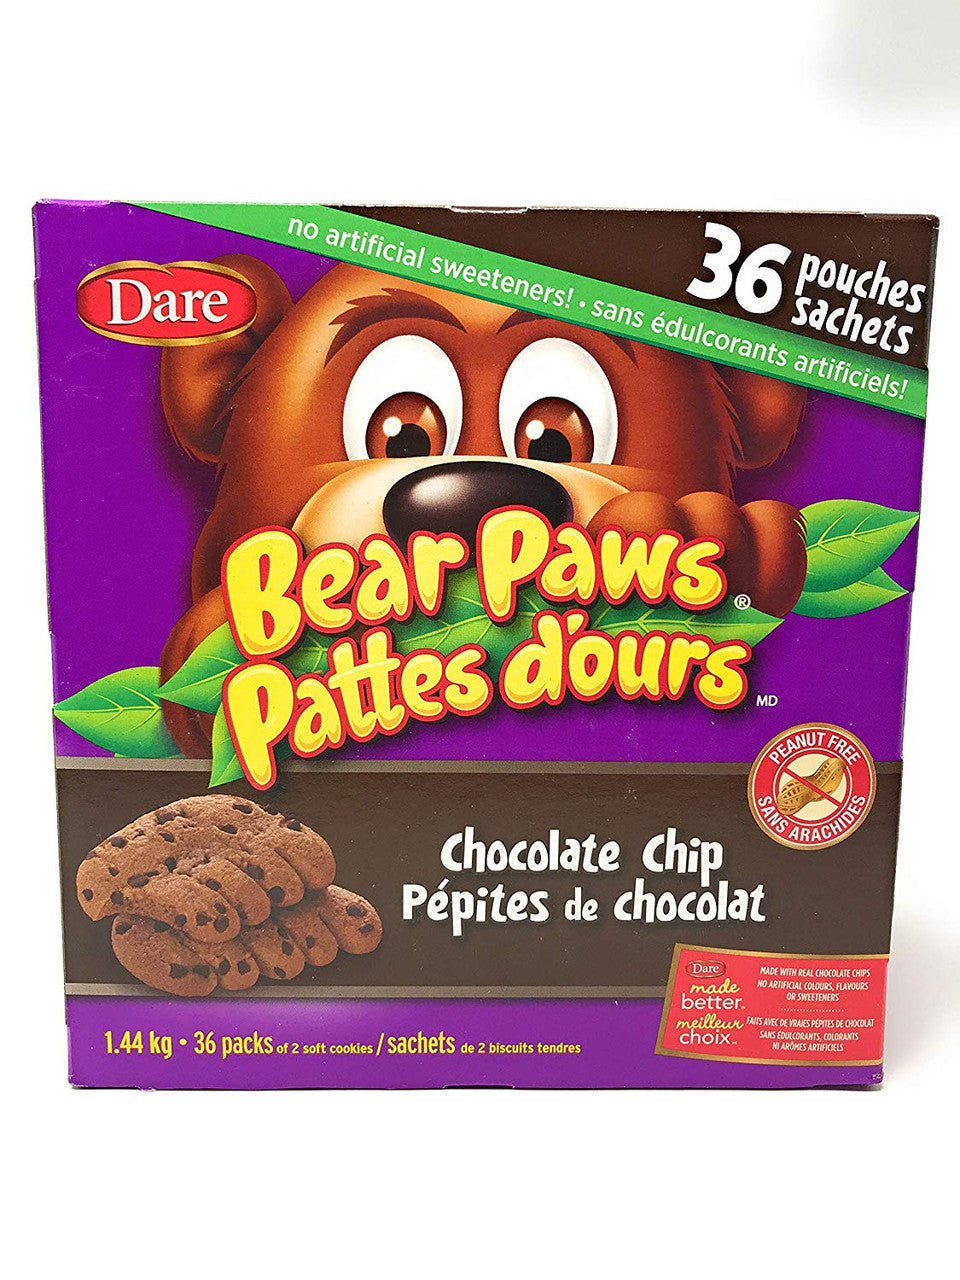 Dare Bear Paws Chocolate Chip Cookies, 36packs, 1.44kg/3.2lbs, (Imported from Canada)